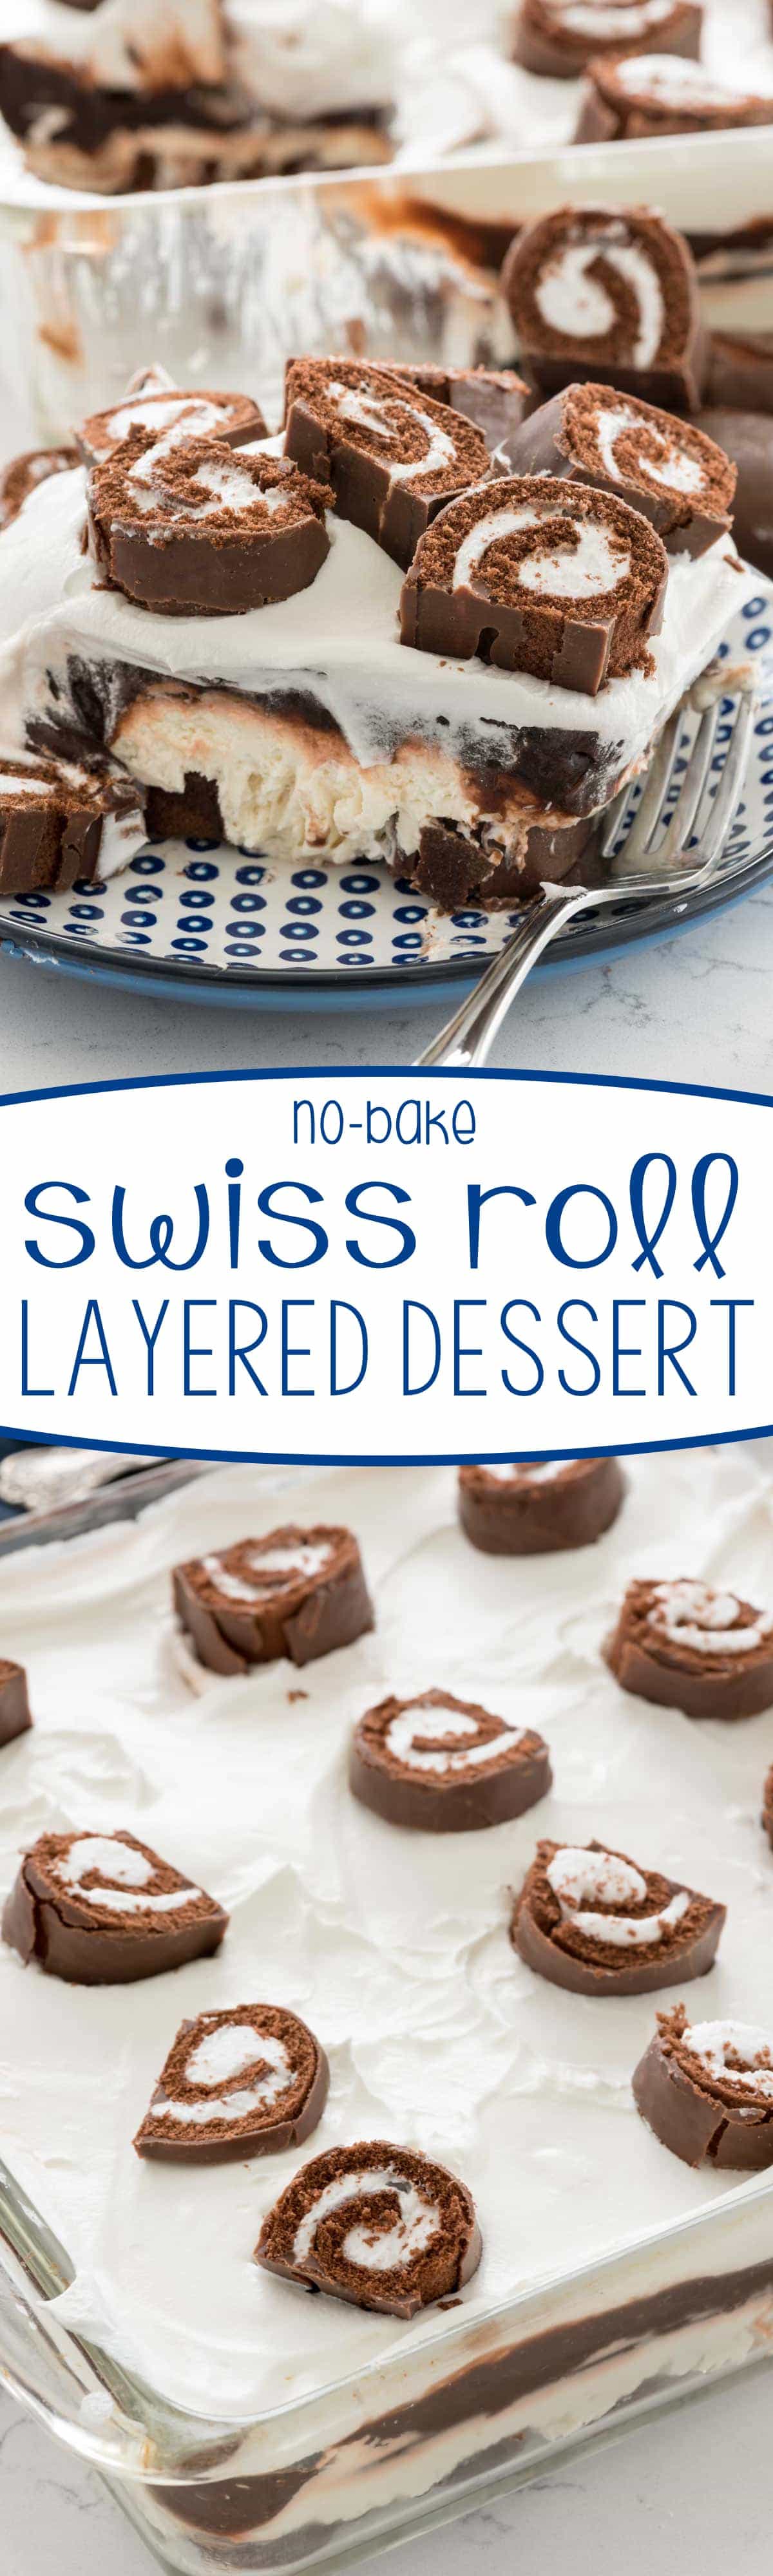 Swiss Roll Layered No Bake Dessert - this easy recipe combines Little Debbie snack rolls with layers of pudding and whipped cream for the perfect easy dessert recipe!